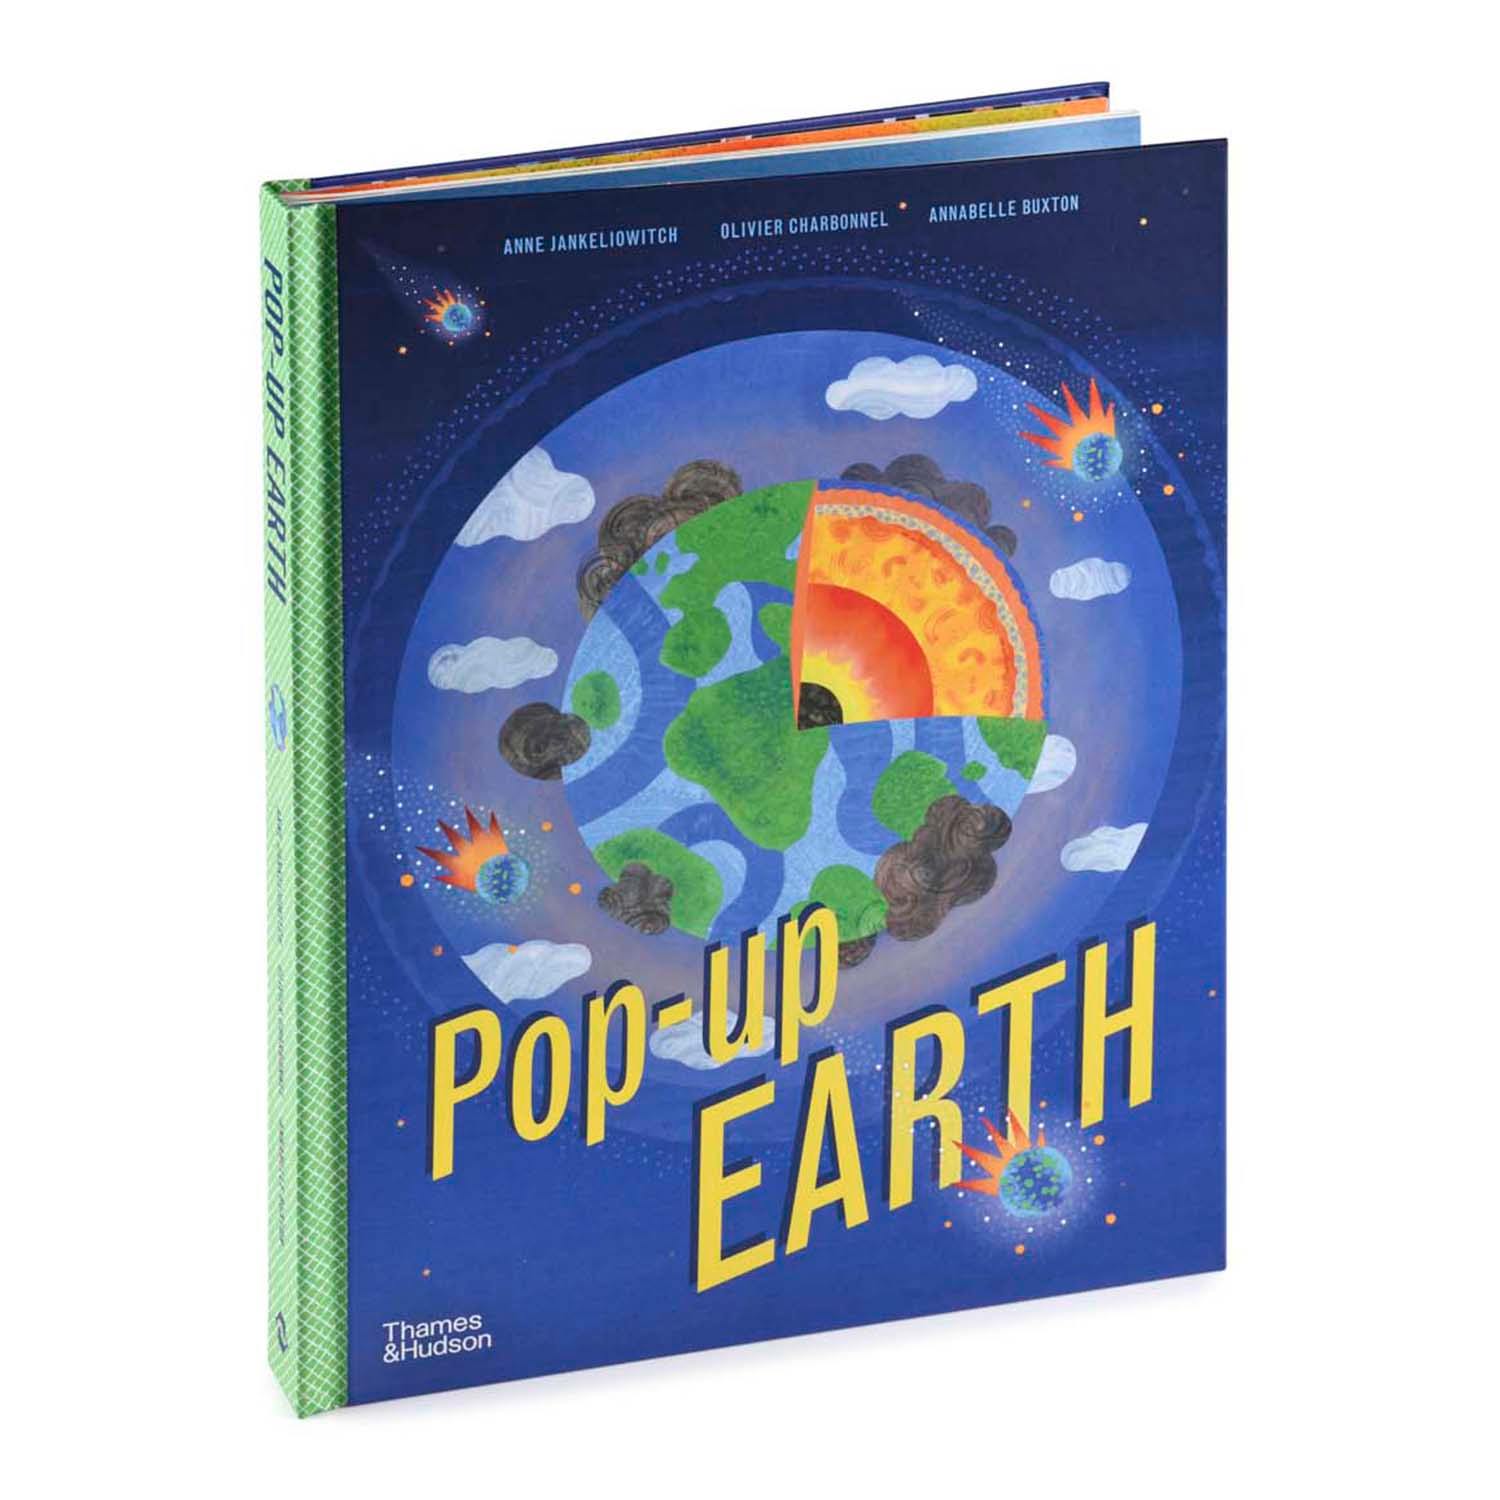 Pop-Up Earth - Science - Science Museum Shop 6